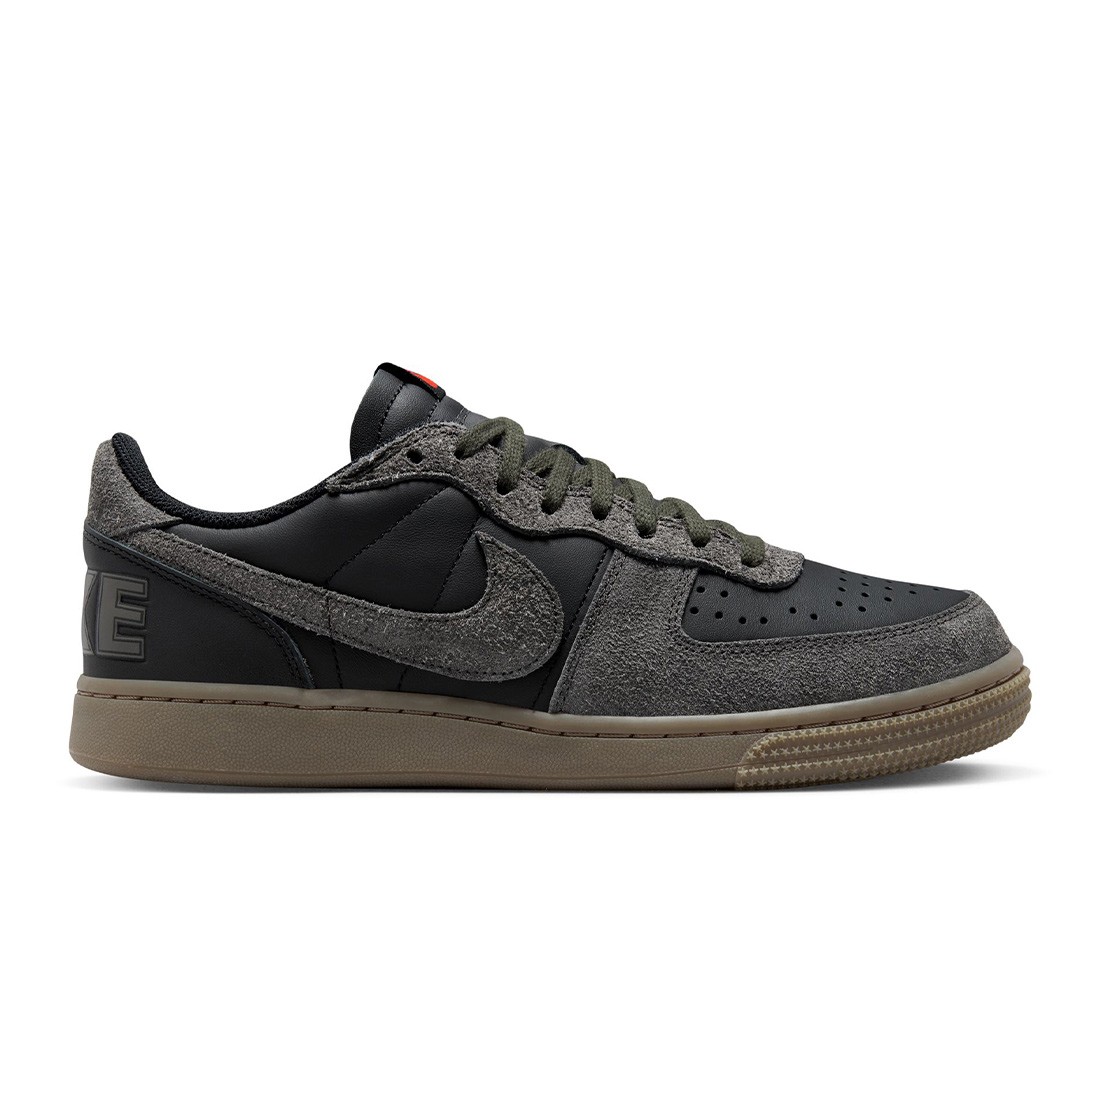 nike sb shoe with mid strap shoes